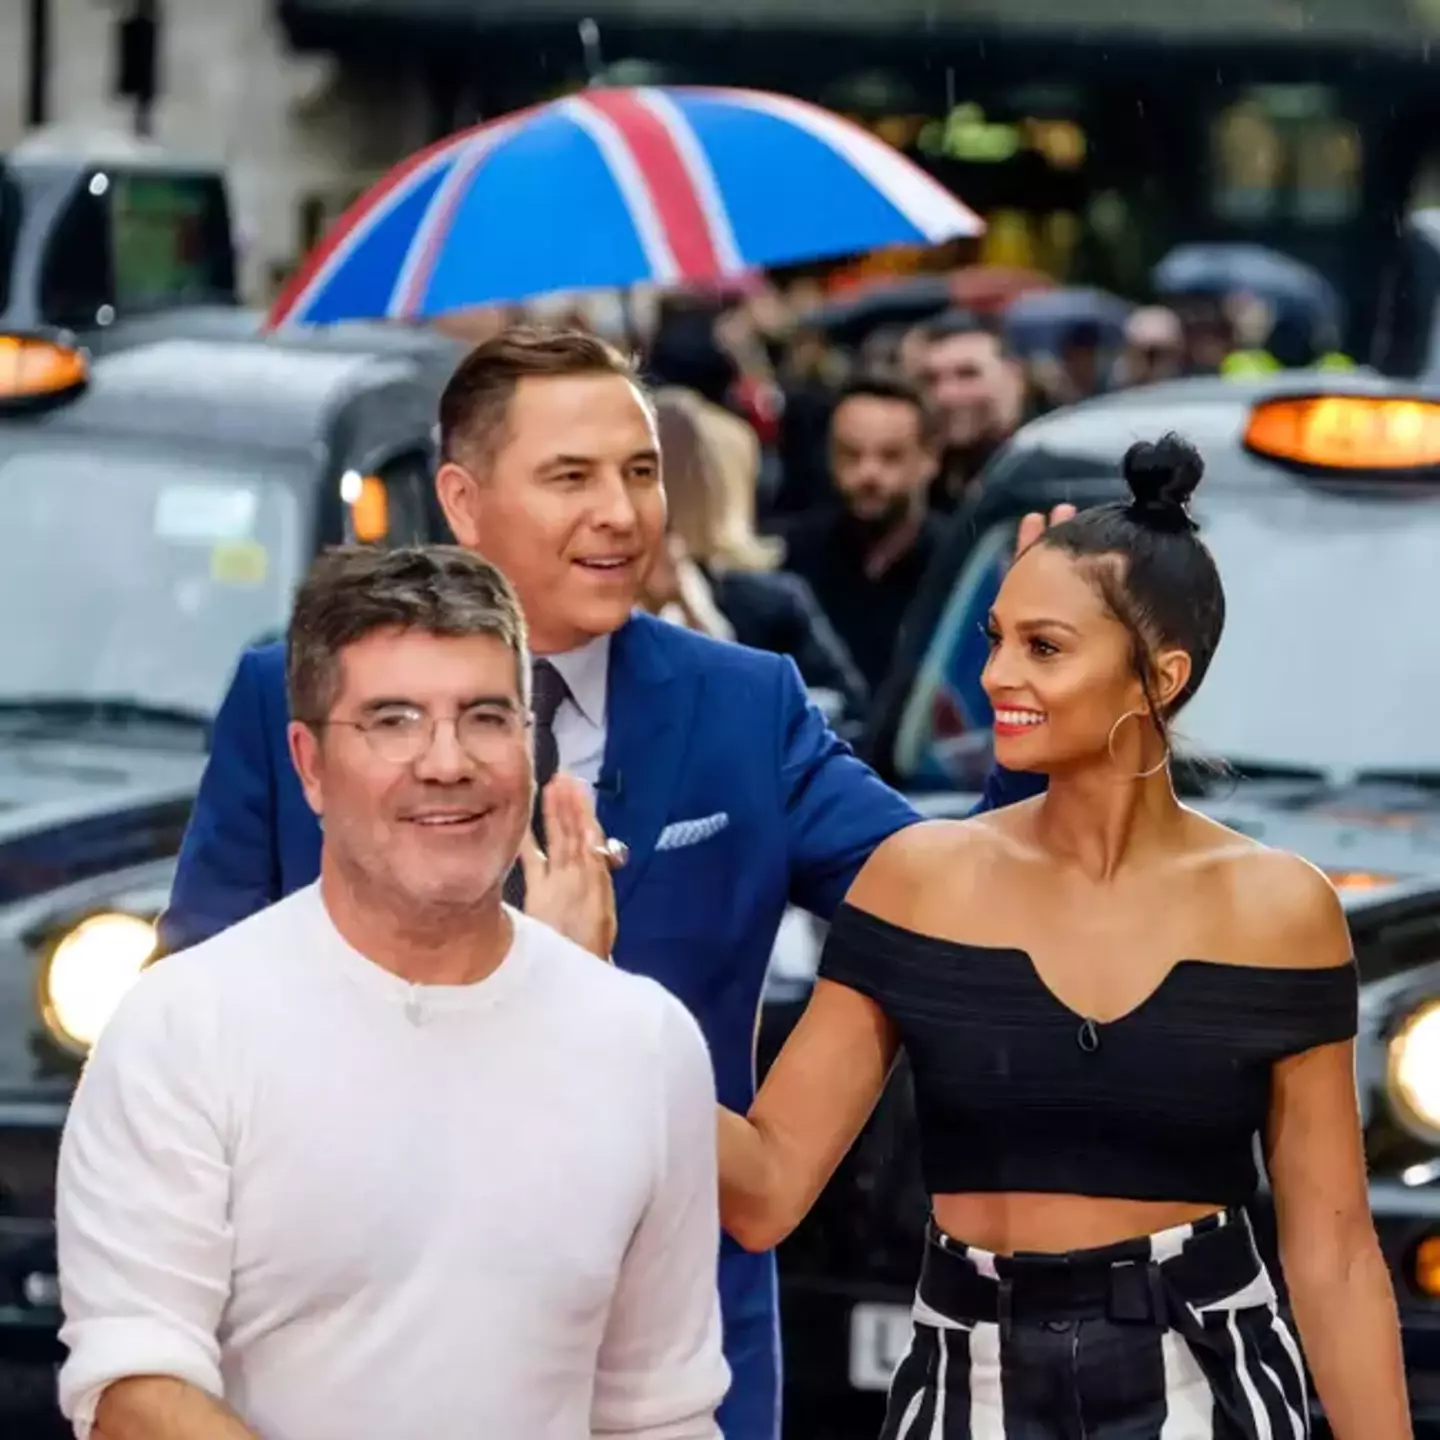 David Walliams ended a long run as judge on Britain's Got Talent and was replaced by Bruno Tonioli.